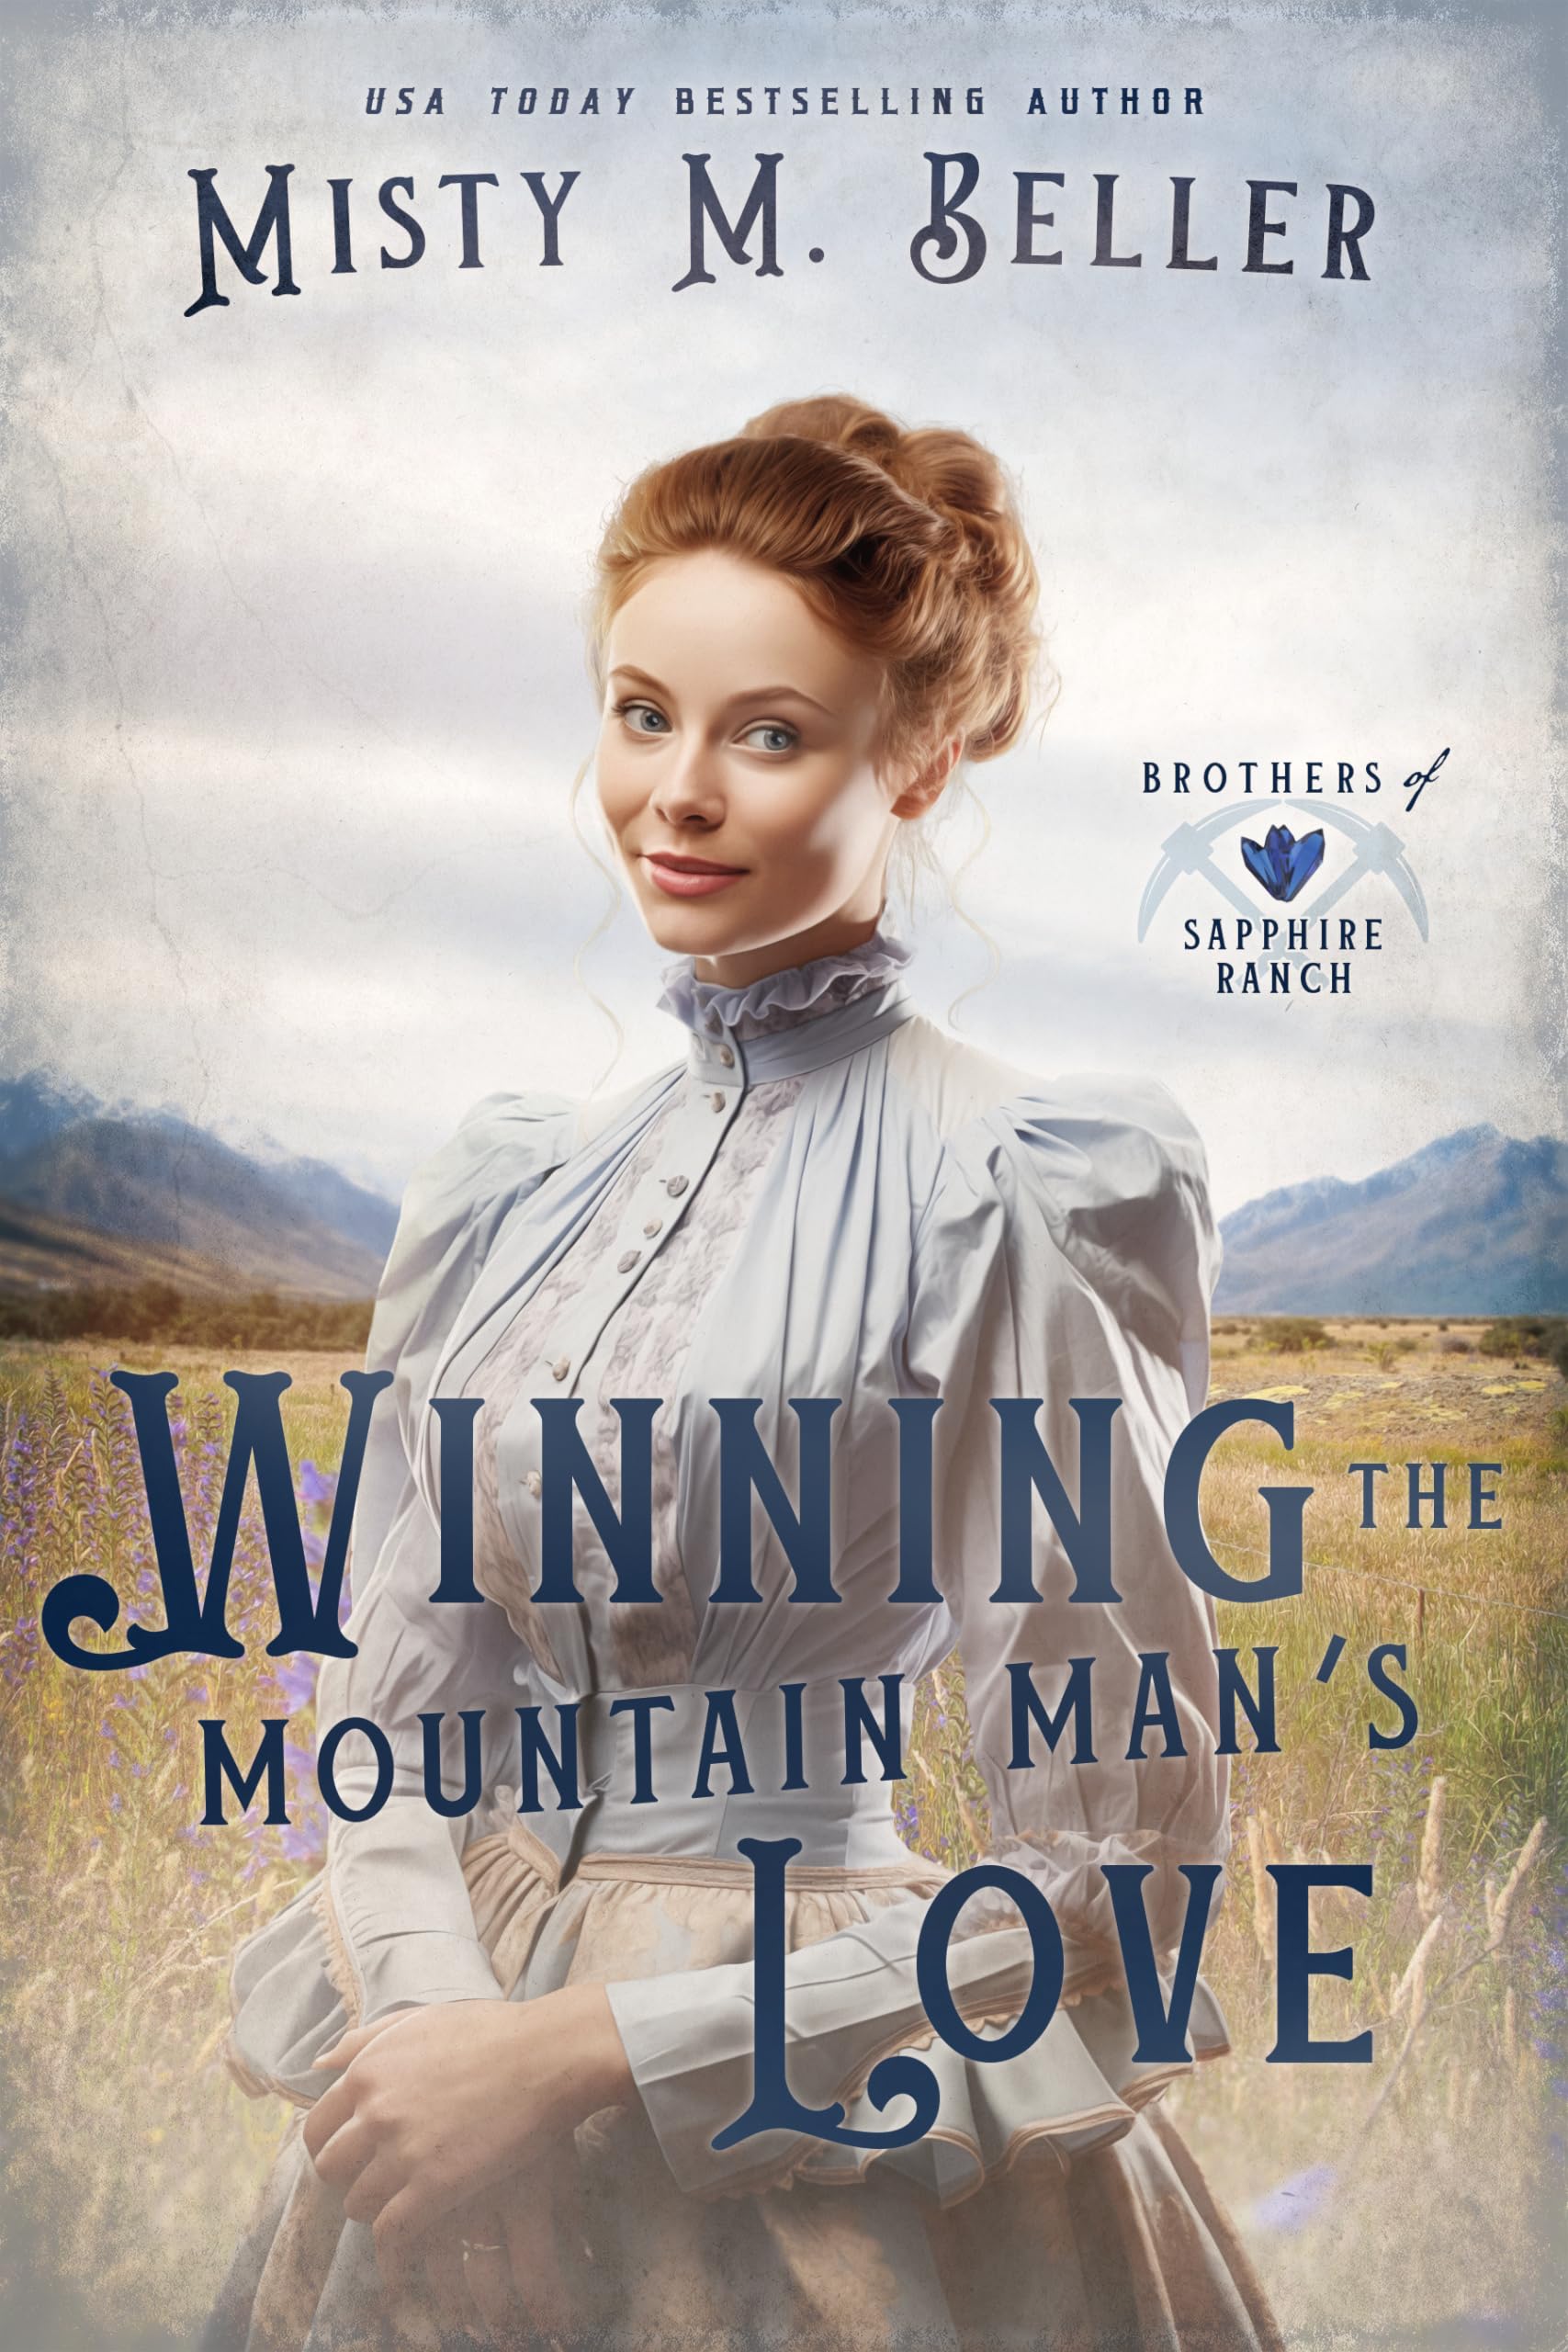 Winning the Mountain Man's Love (Brothers of Sapphire Ranch Book 5)